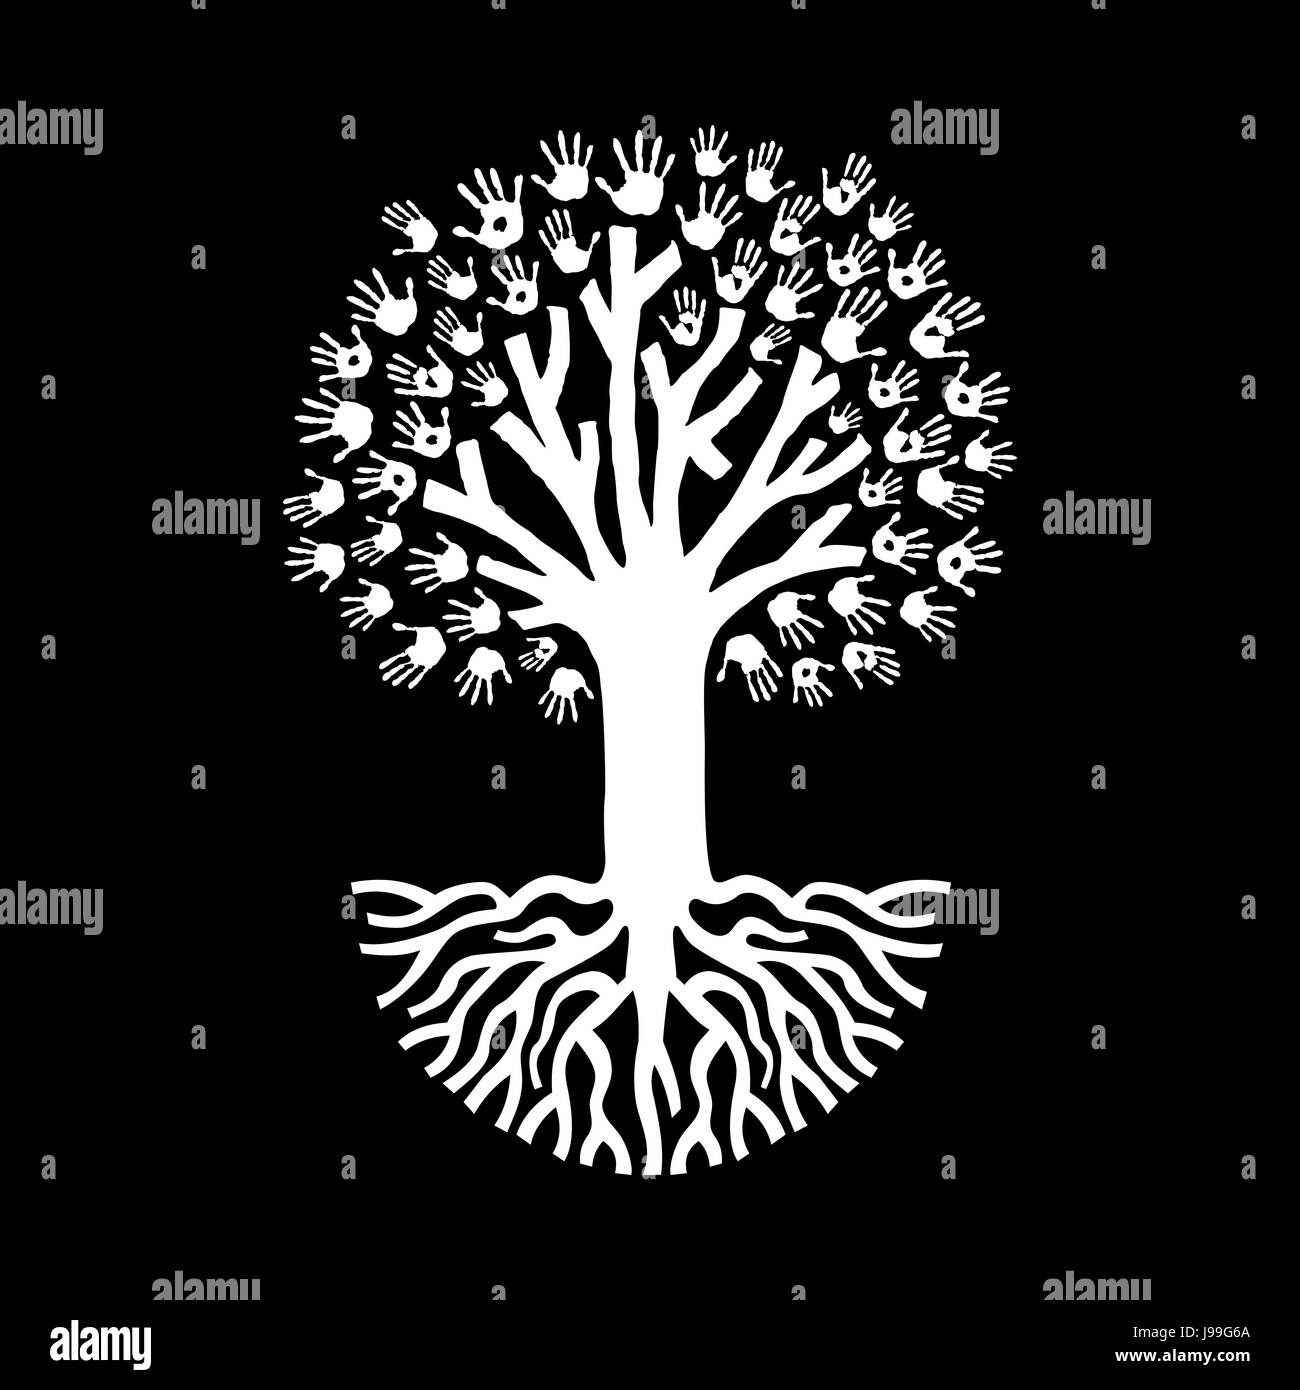 Isolated over black tree made of diverse hand prints with big roots. Community help or teamwork concept illustration. EPS10 vector. Stock Vector